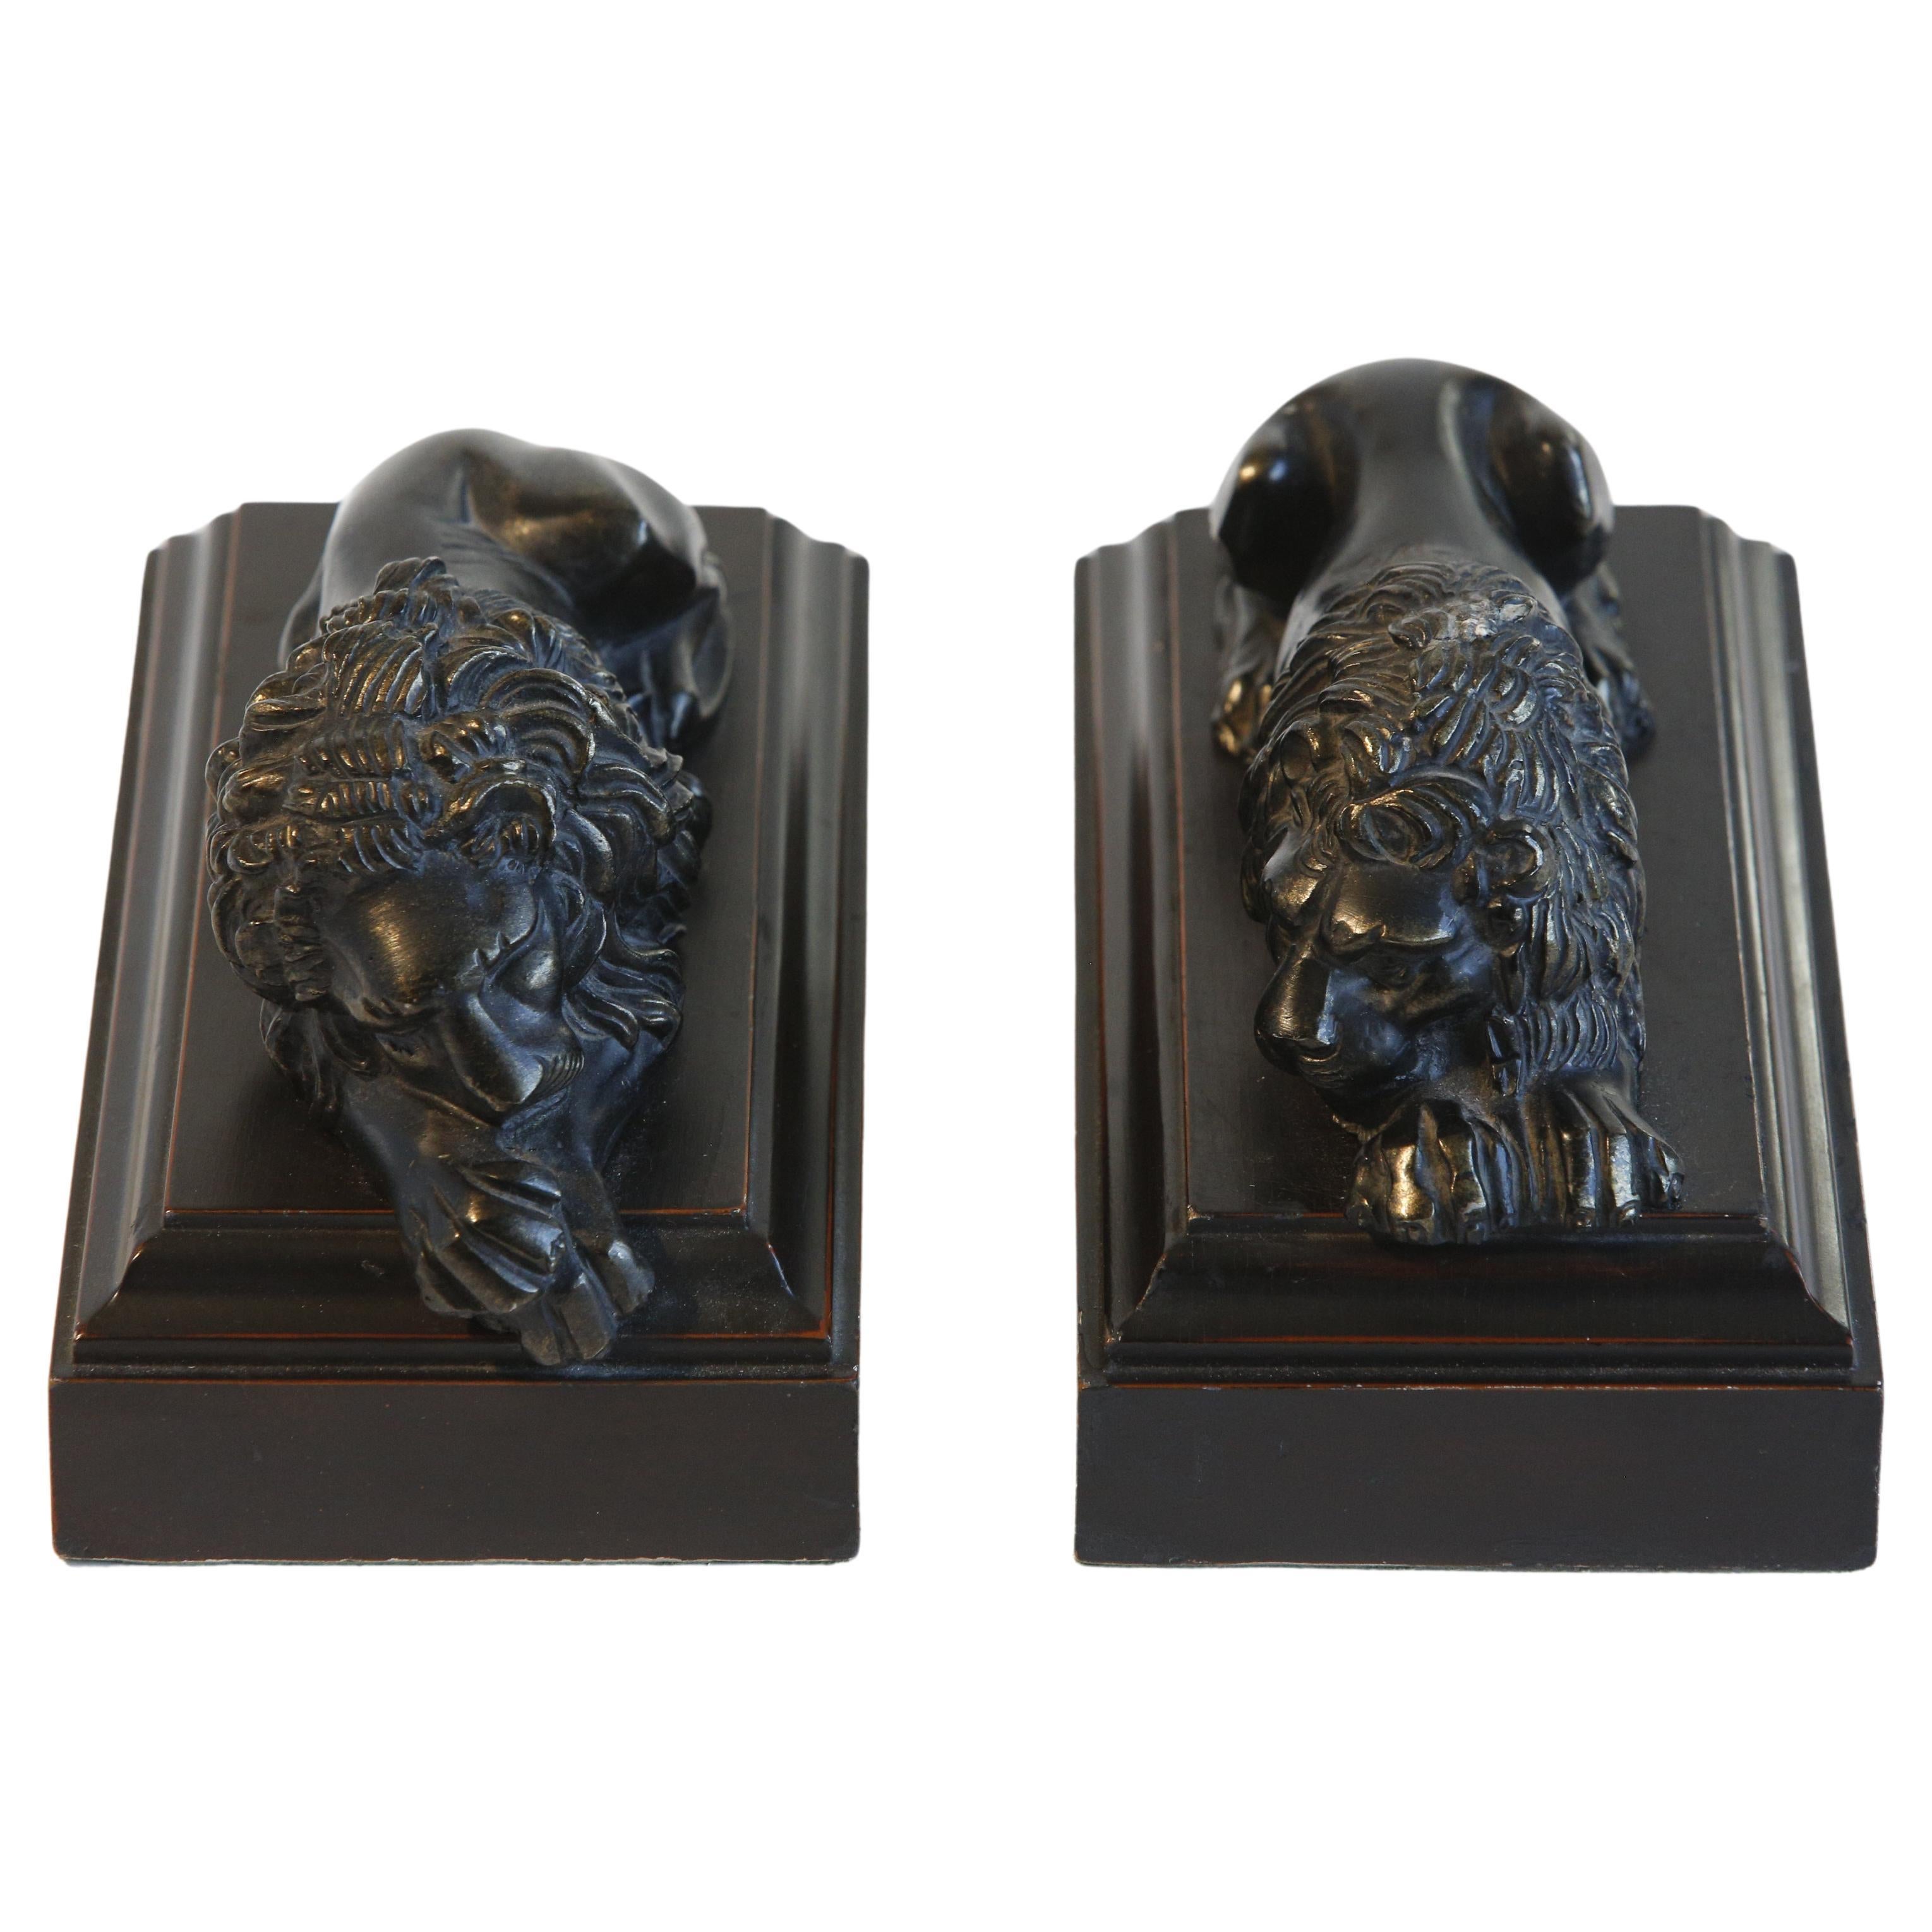 A pair of resting bronze lions on shaped walnut painted plinths modeled on the original marble sculpture by Antonio Canova.
        
Reduction from the originals created by Antonio Canova for the tomb of Pope Clement XIII in St. Peter's Basilica in